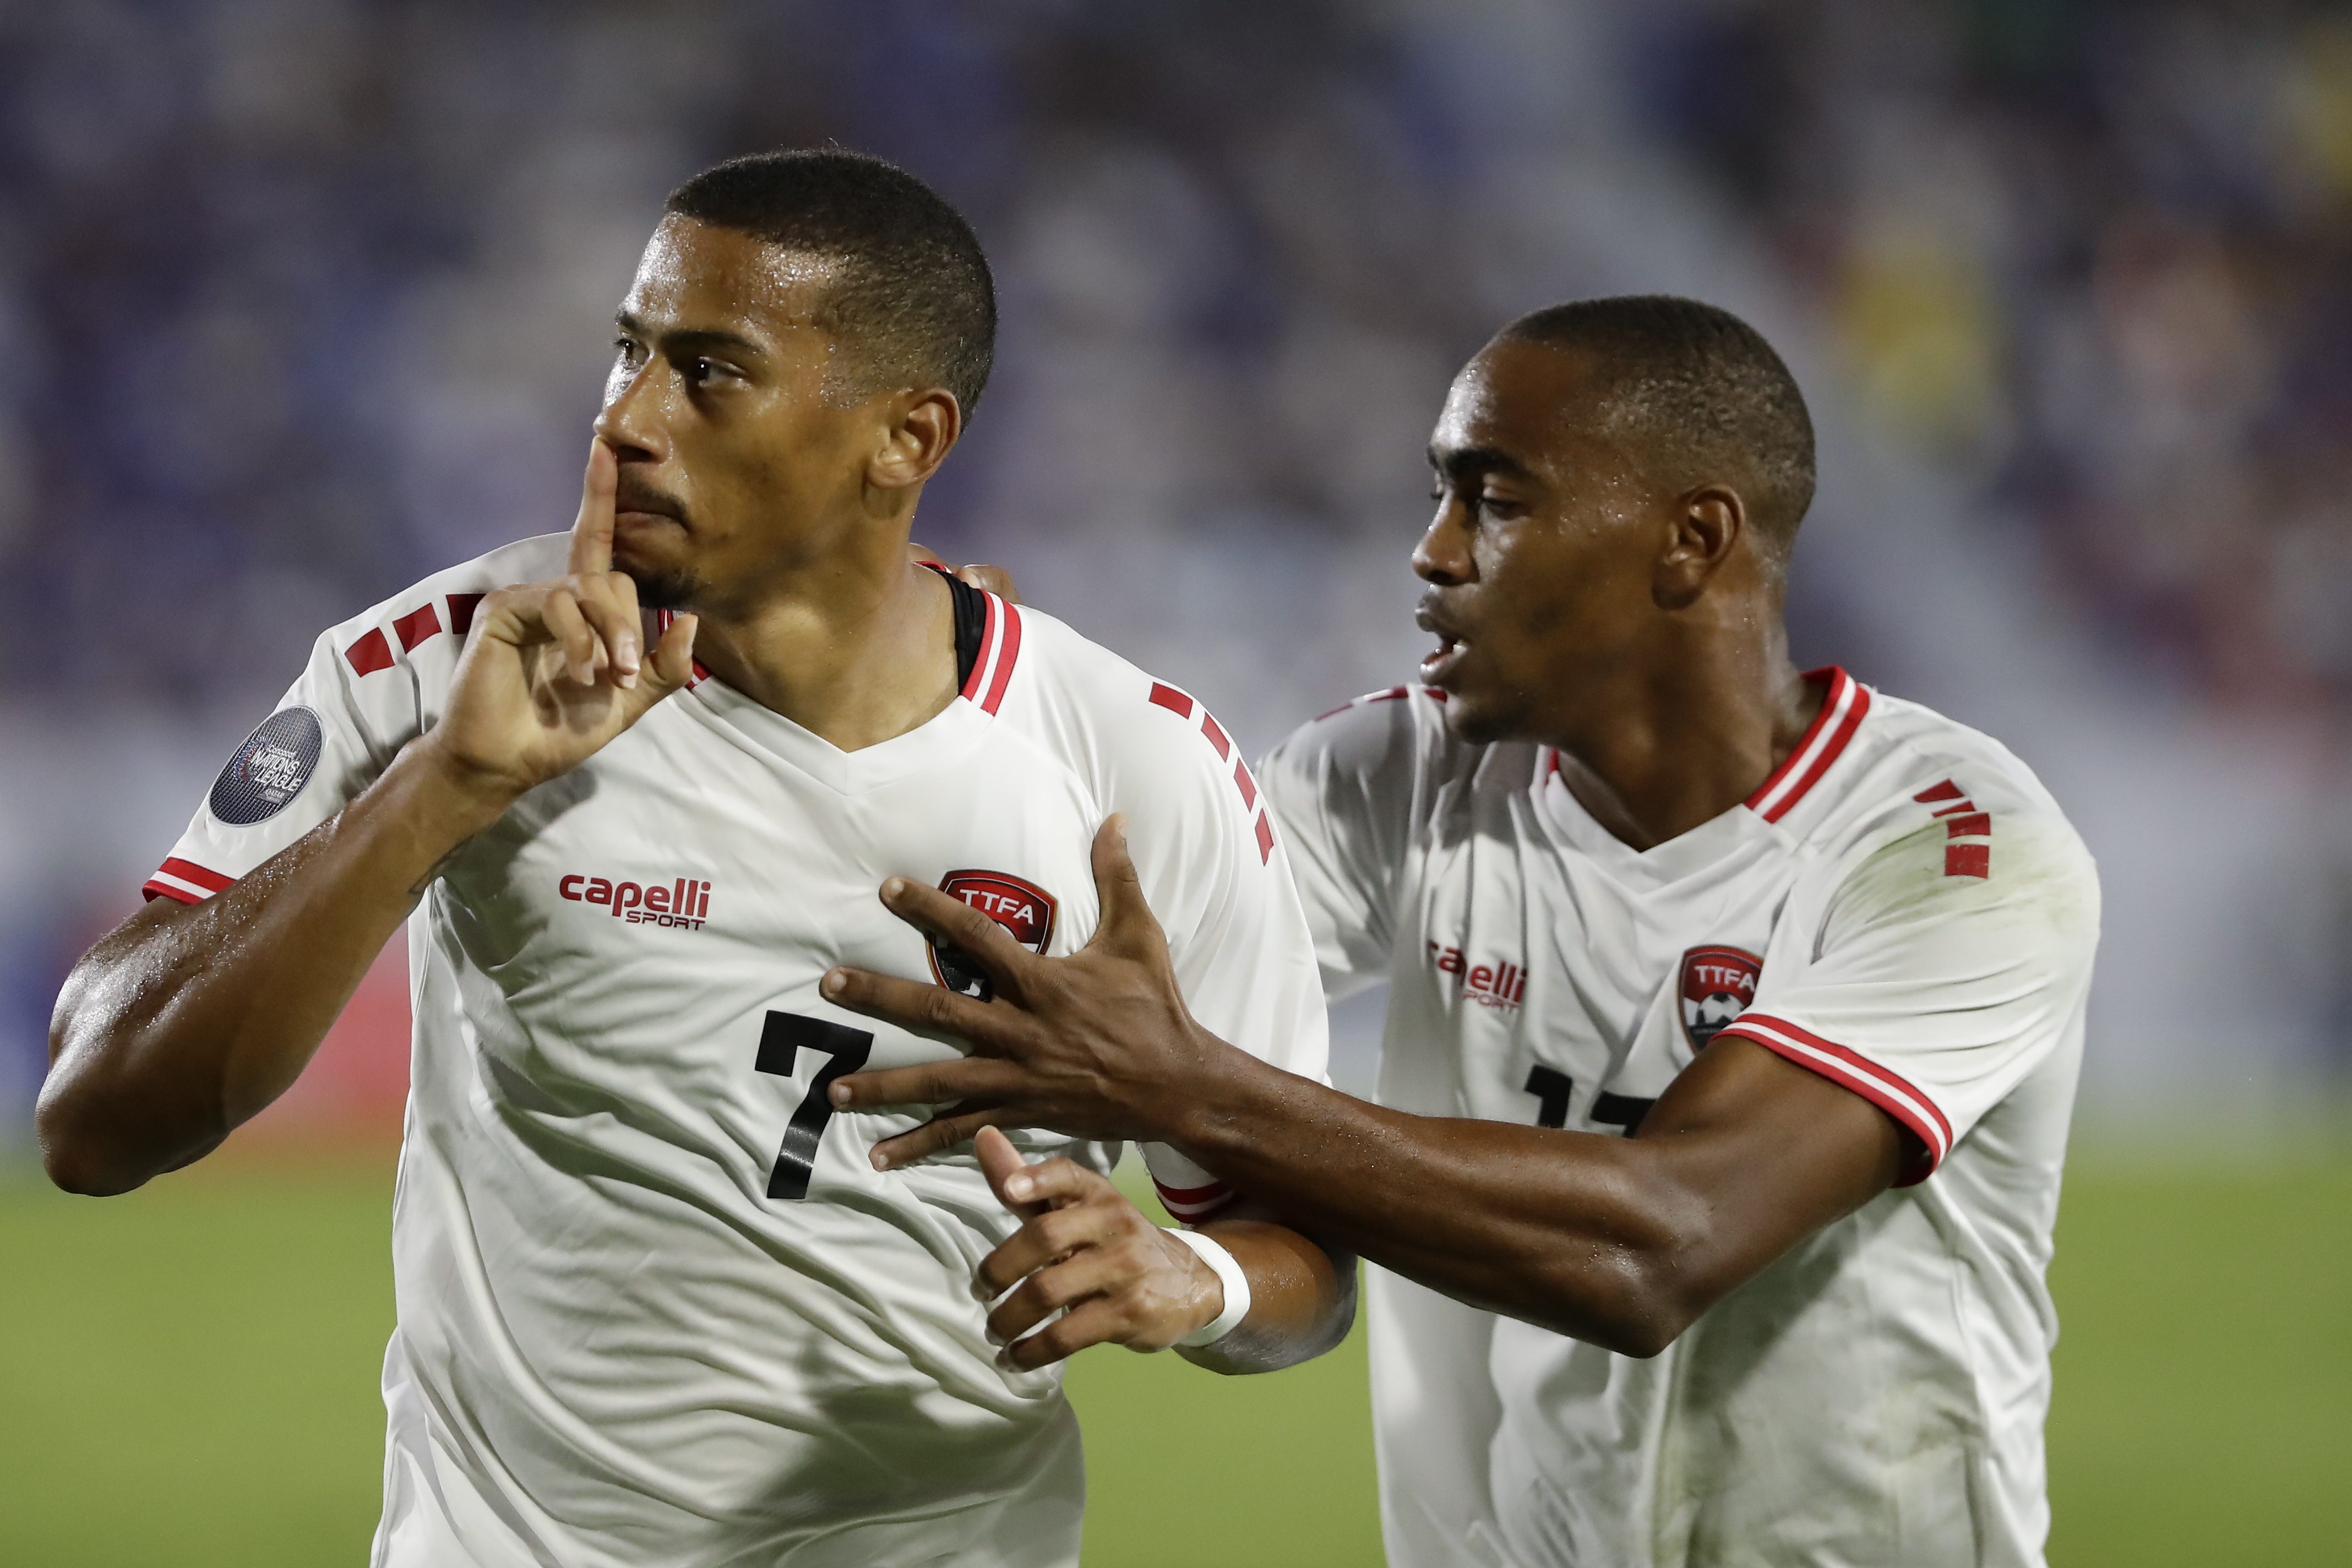 Trinidad and Tobago calls up 11 players from the Legion to face Guatemala in the Nations League